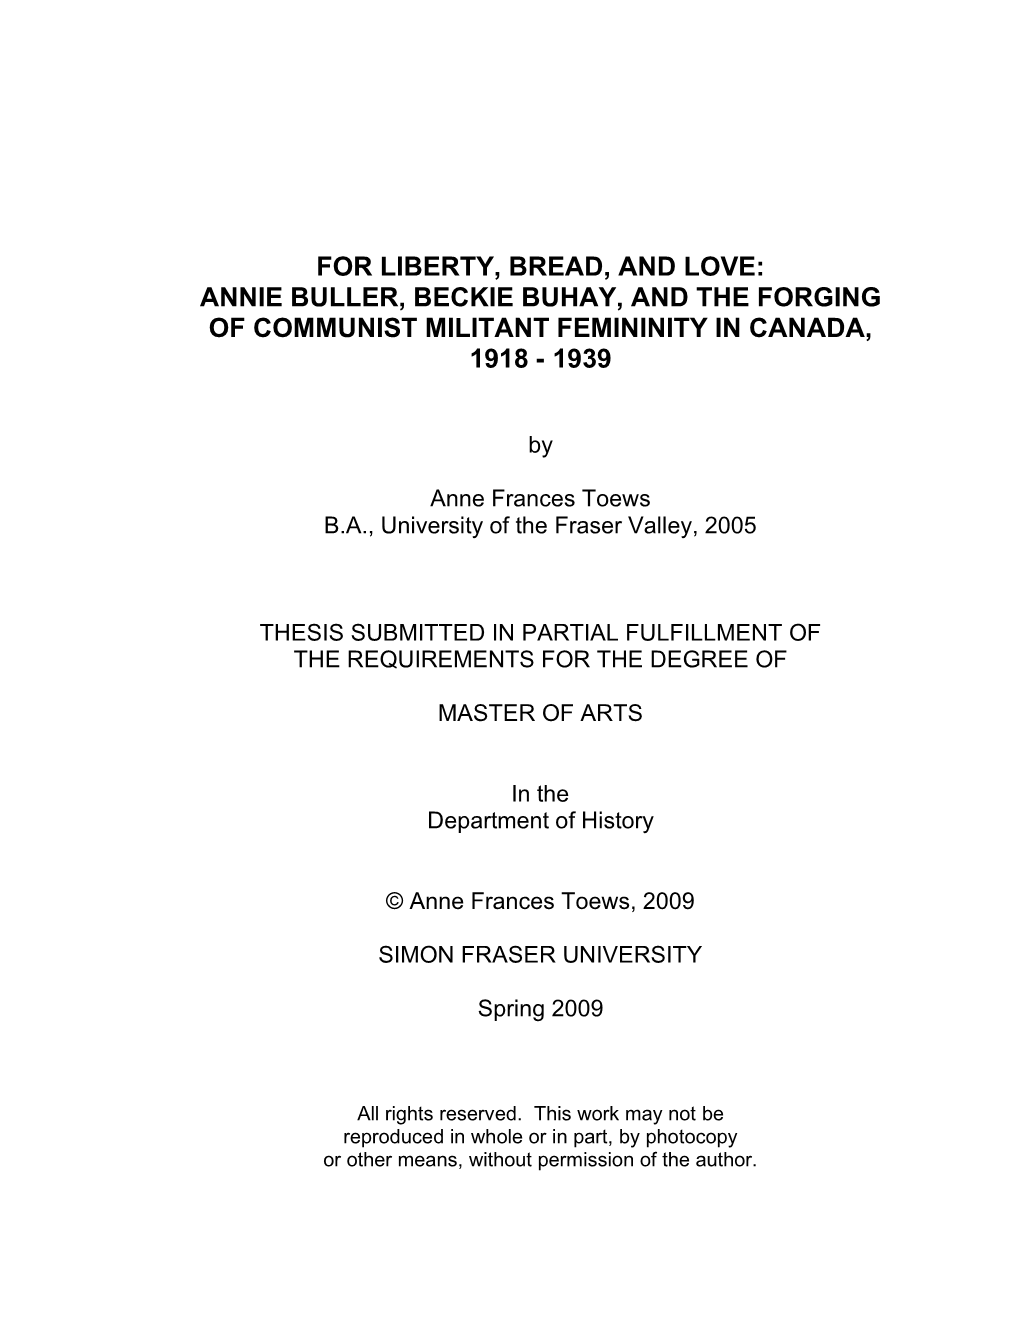 Annie Buller, Beckie Buhay, and the Forging of Communist Militant Femininity in Canada, 1918 - 1939